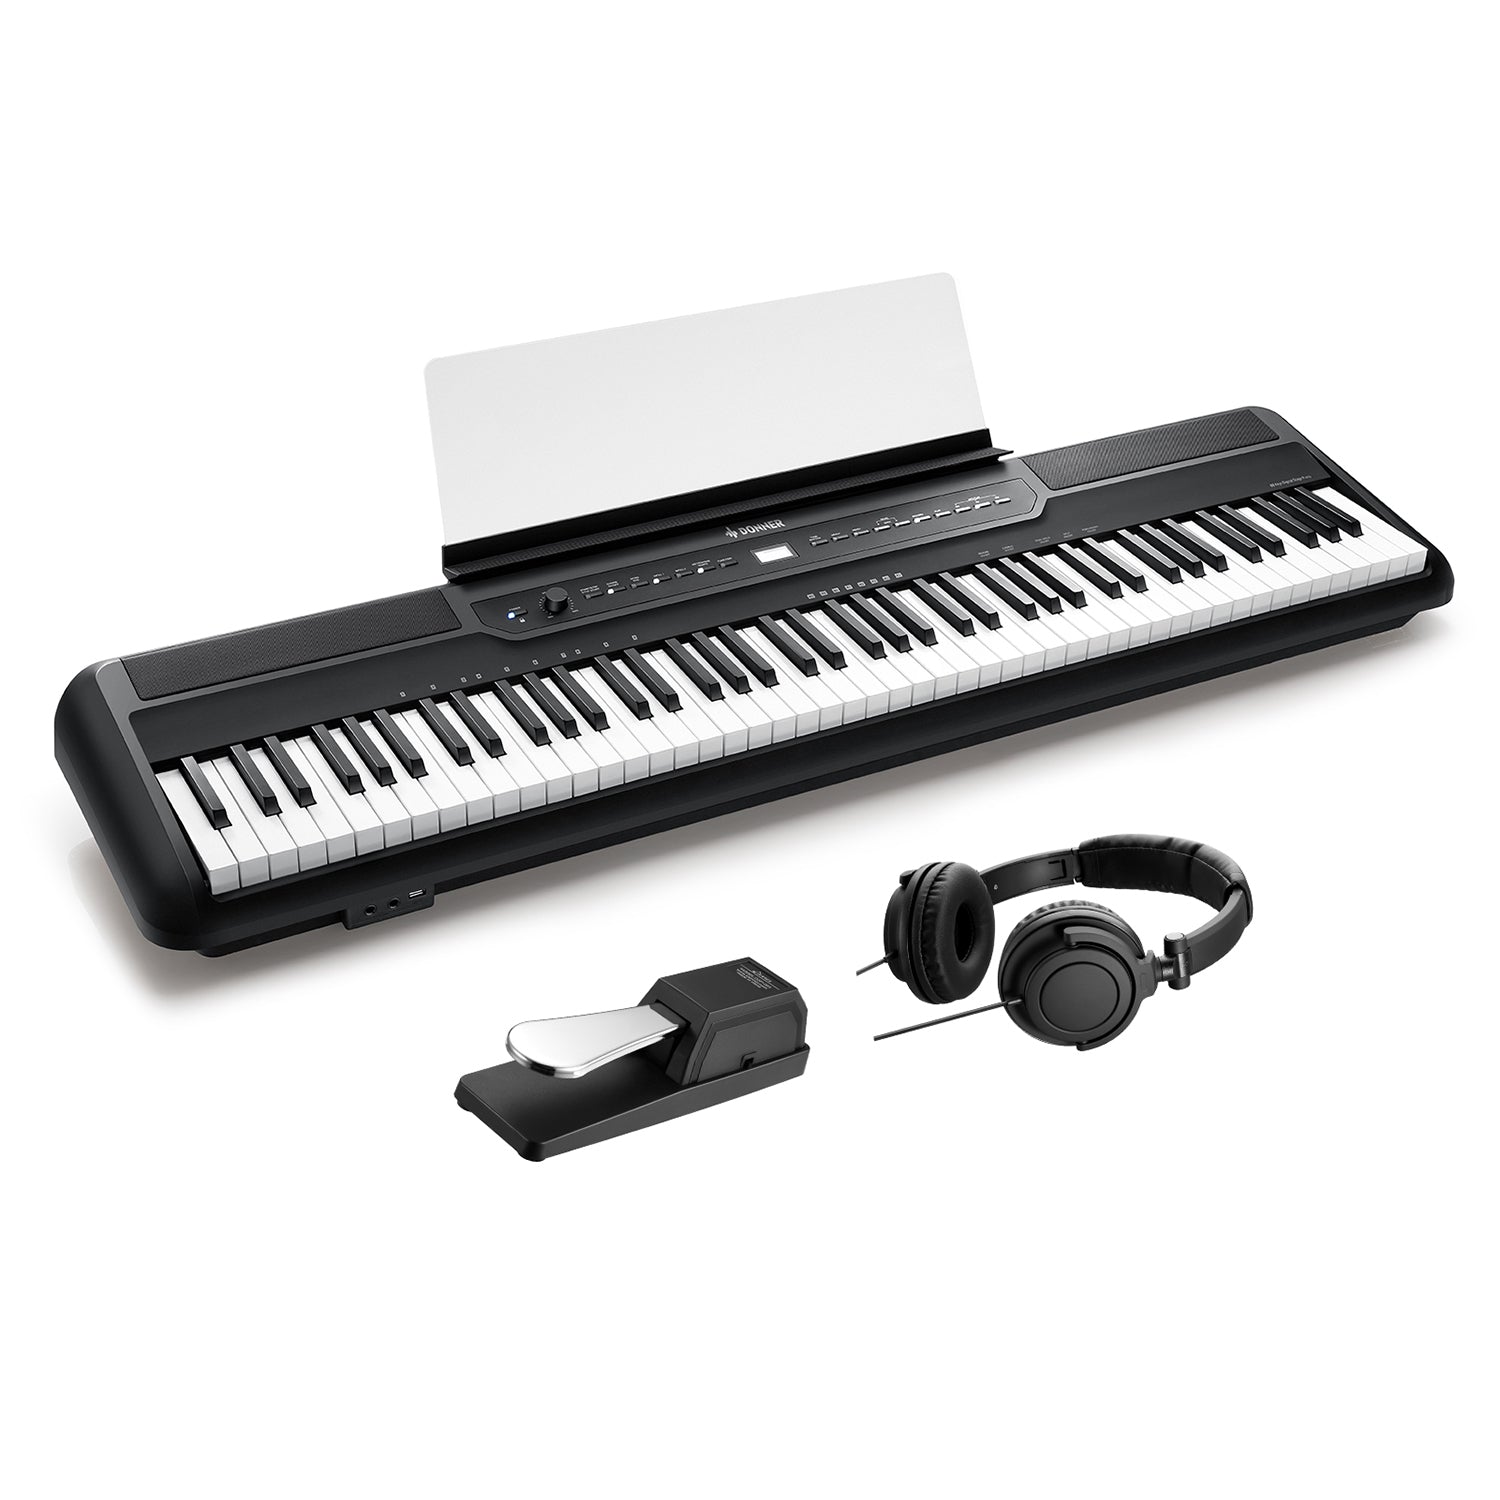 

Donner SE-1 Slim Portable 88 Key Hammer-Action Weighted Digital Piano Professional Arranger Keyboard with Sustain Pedal